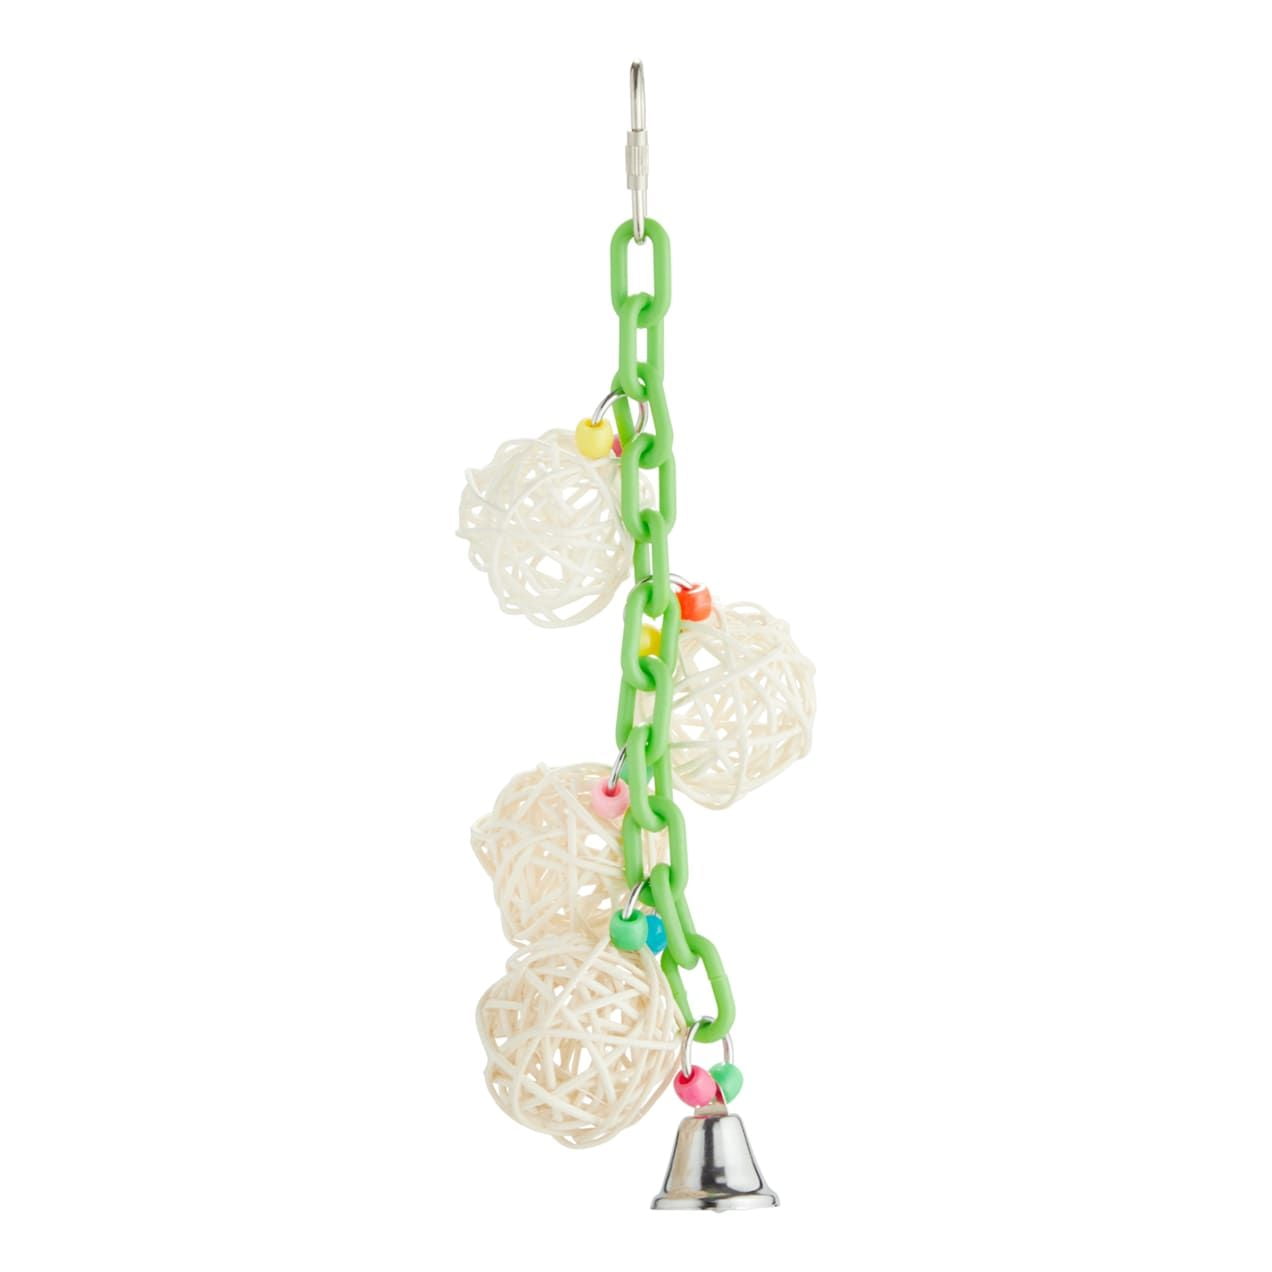 Picture of A&E Cage HB01271 4 Vine Balls on Chain with Bell - 9.06 x 3.54 x 3.54 in.